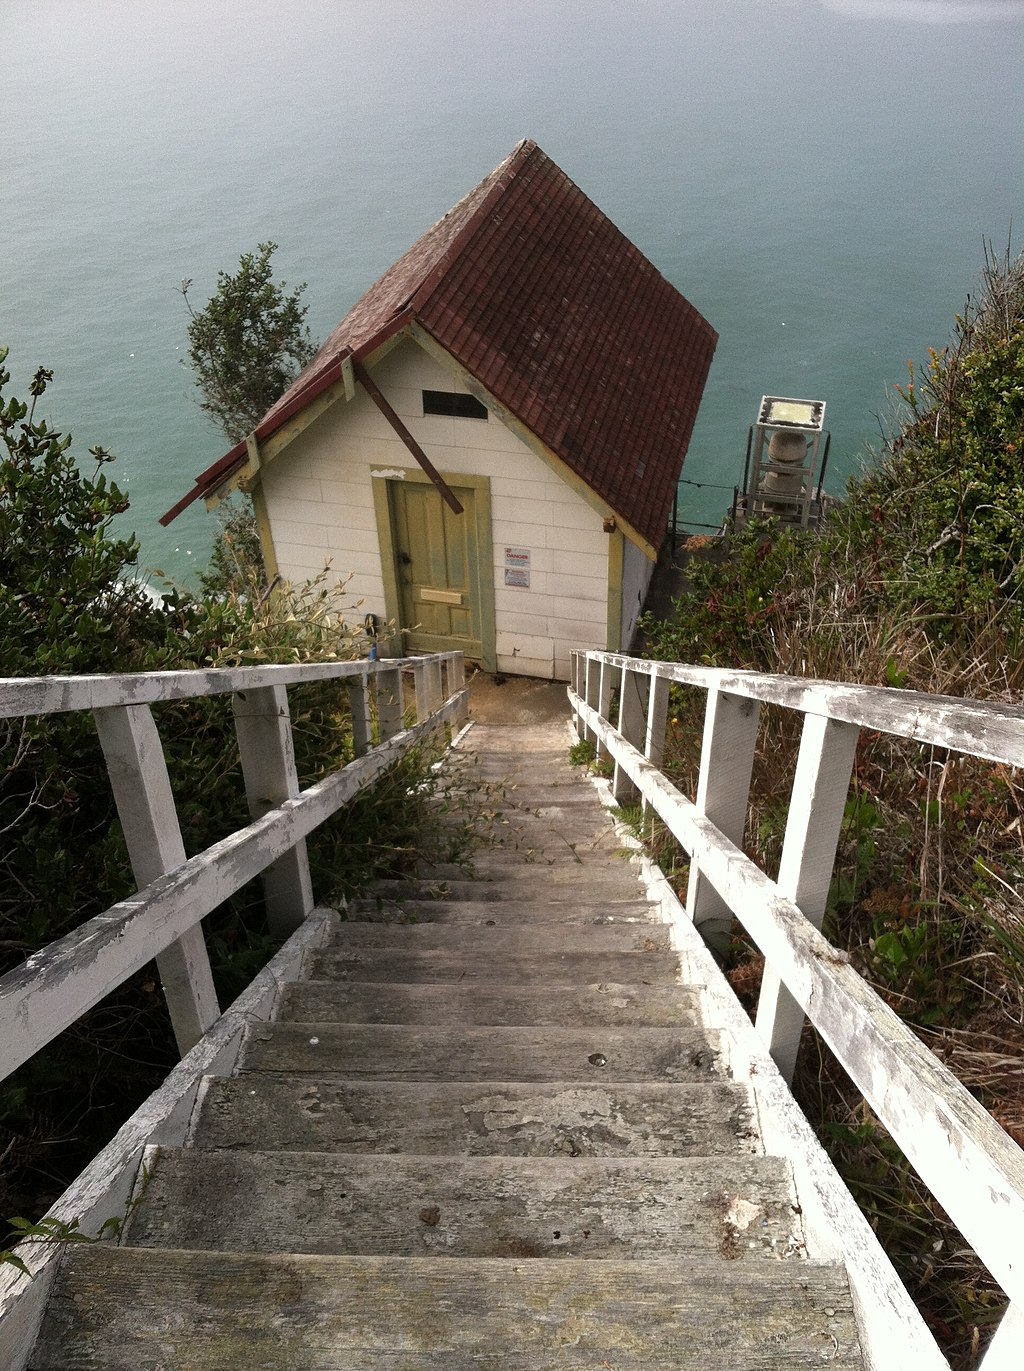 The old Bell House is located fairly close the lighthouse.